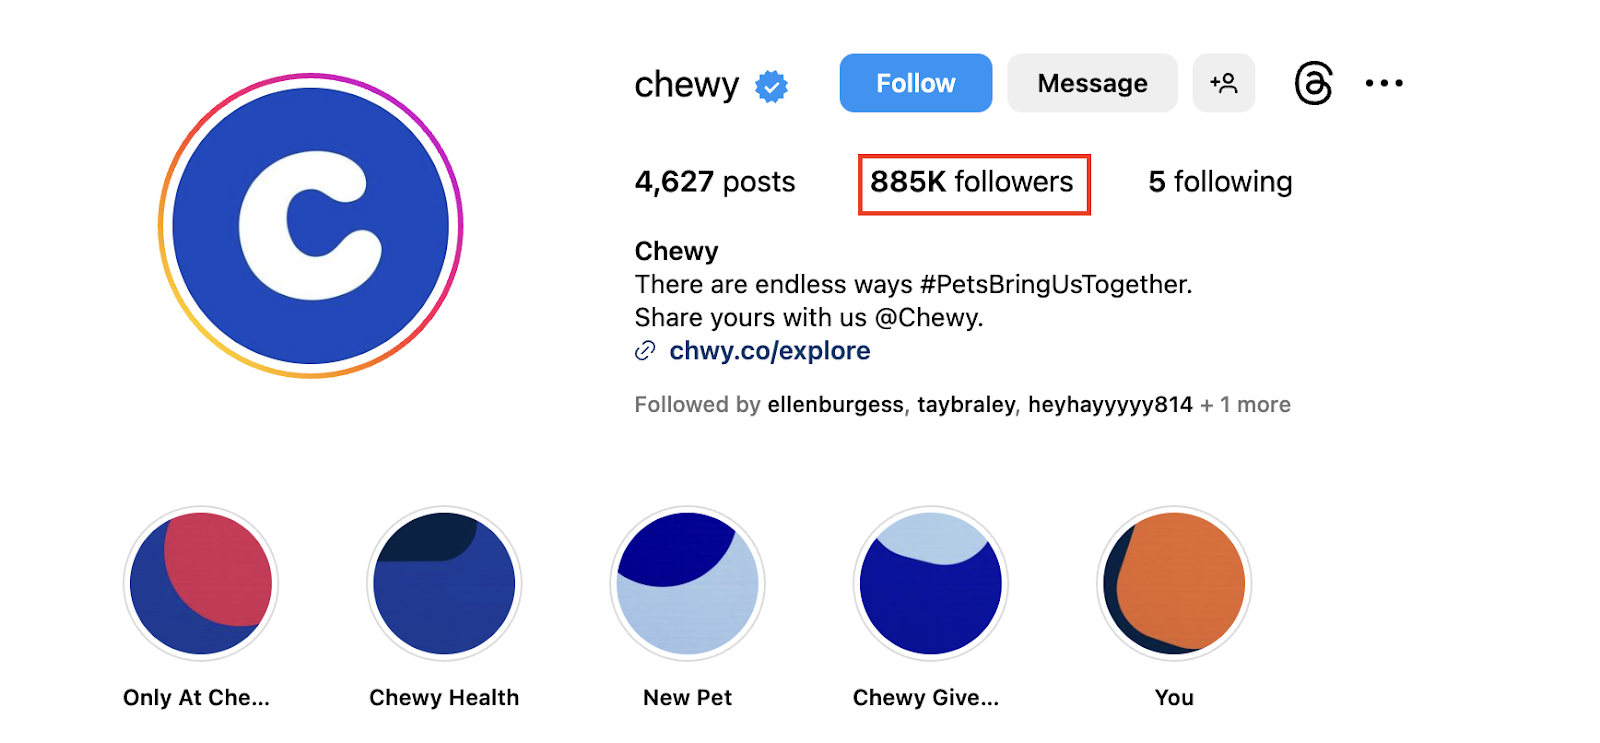 Chewy Instagram Profile. Does not outsource customer service.